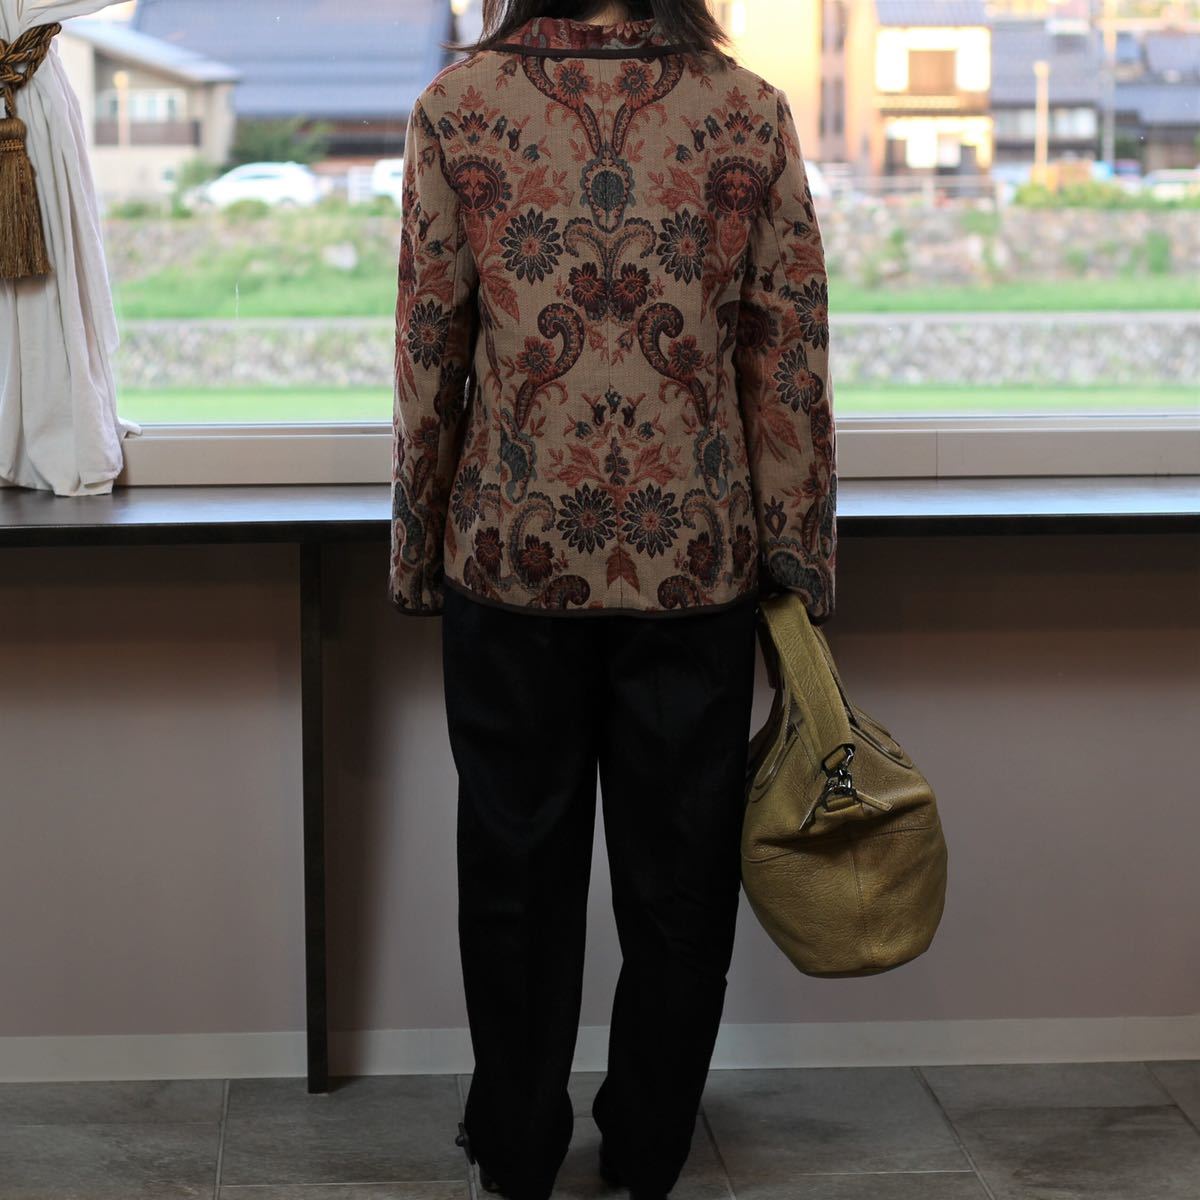 USA VINTAGE KASPER PAISLEY PATTERNED EMBROIDERY JACQUARD JACKET/アメリカ古着ペイズリー柄刺繍ジャガードジャケット_画像10